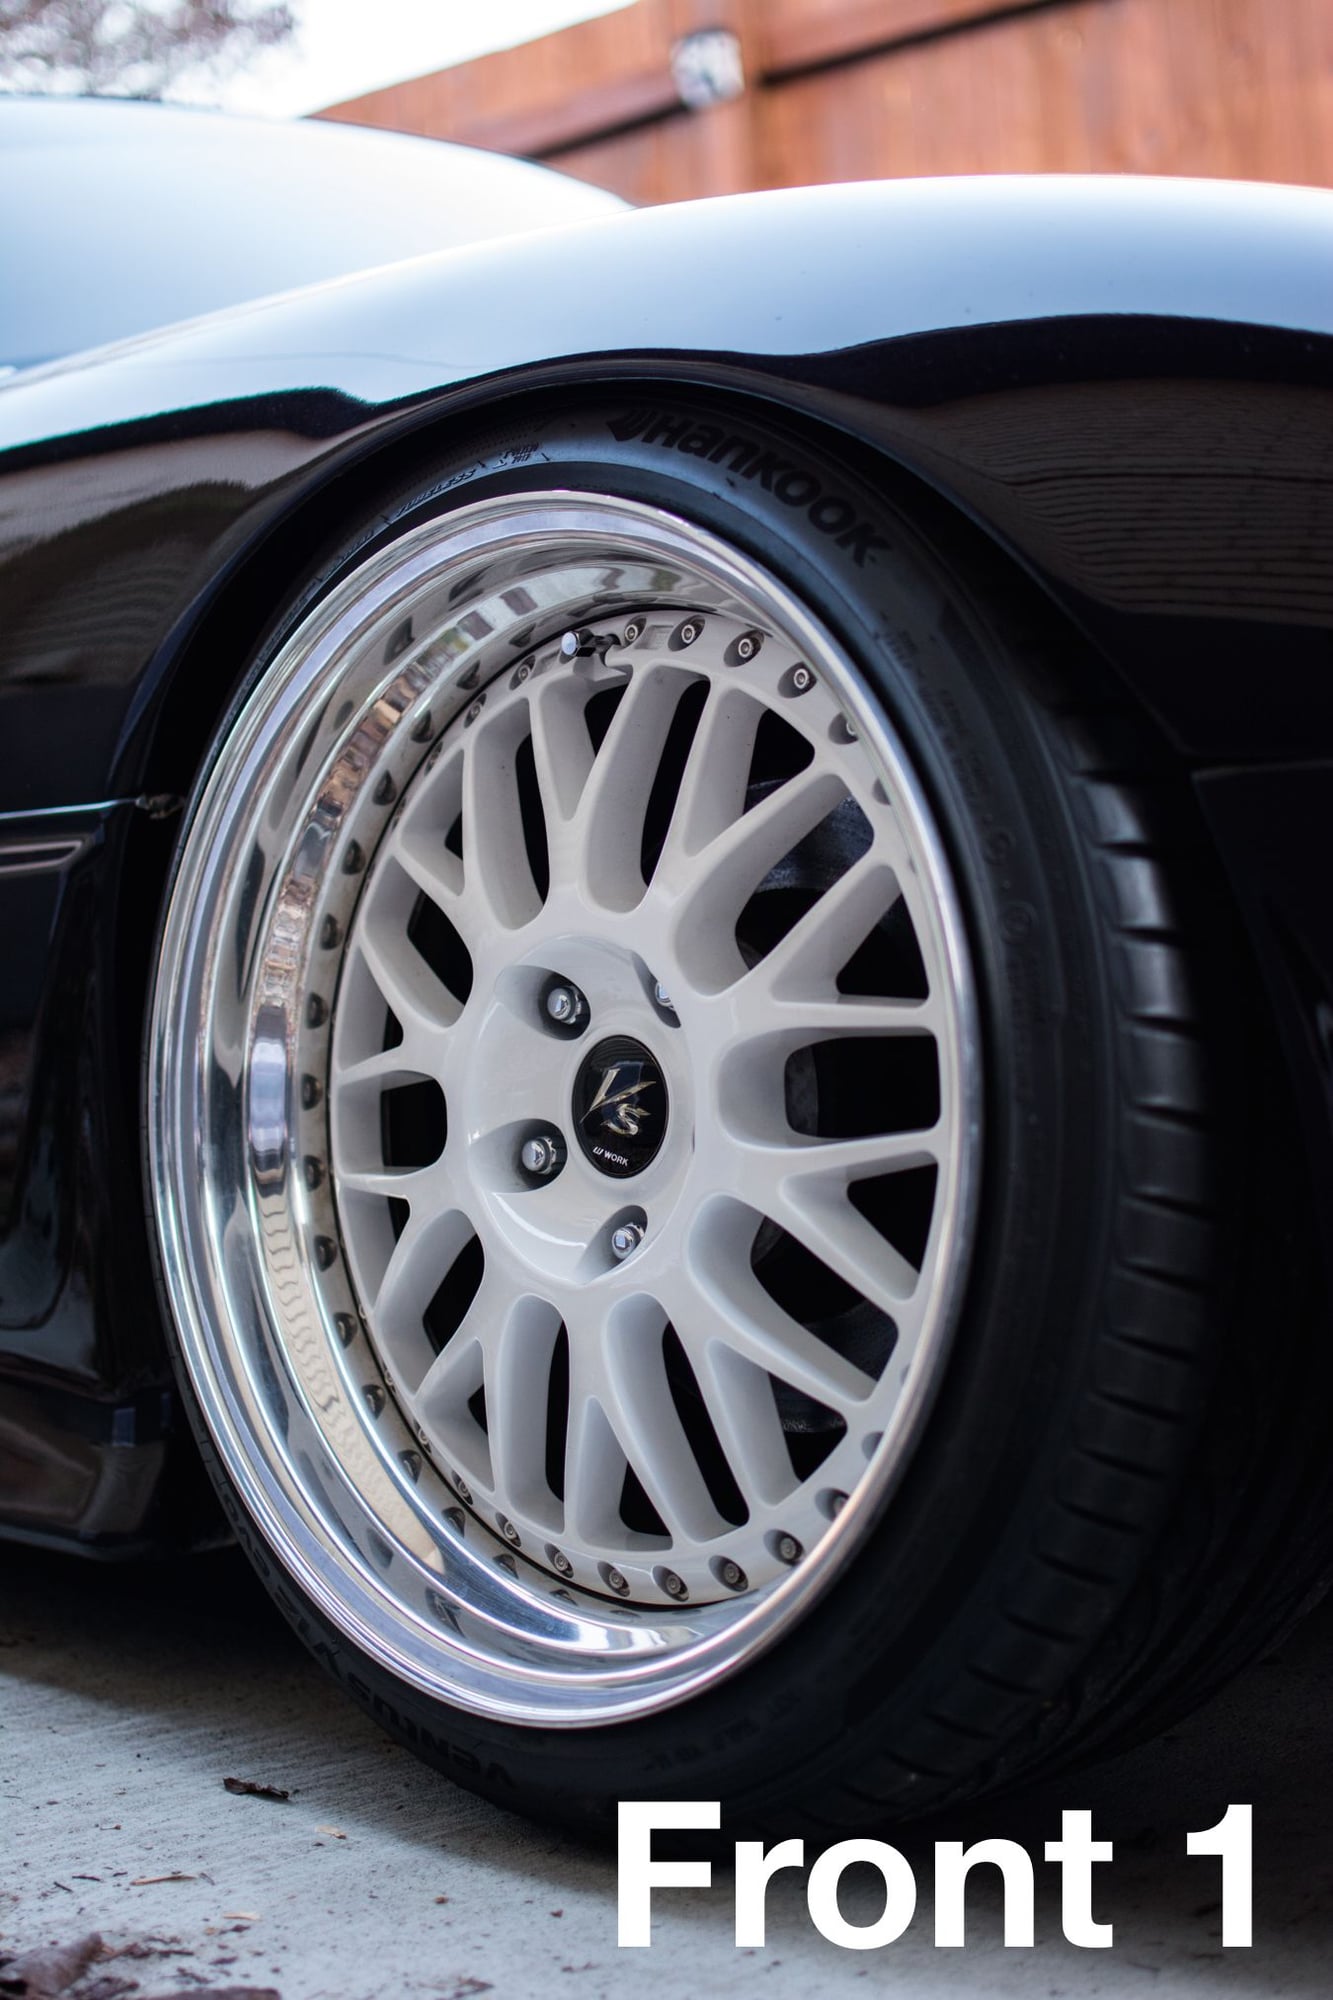 Wheels and Tires/Axles - Work VS-XX - White step lip. Great FD Spec! - Used - All Years Mazda RX-7 - Salt Lake City, UT 84111, United States